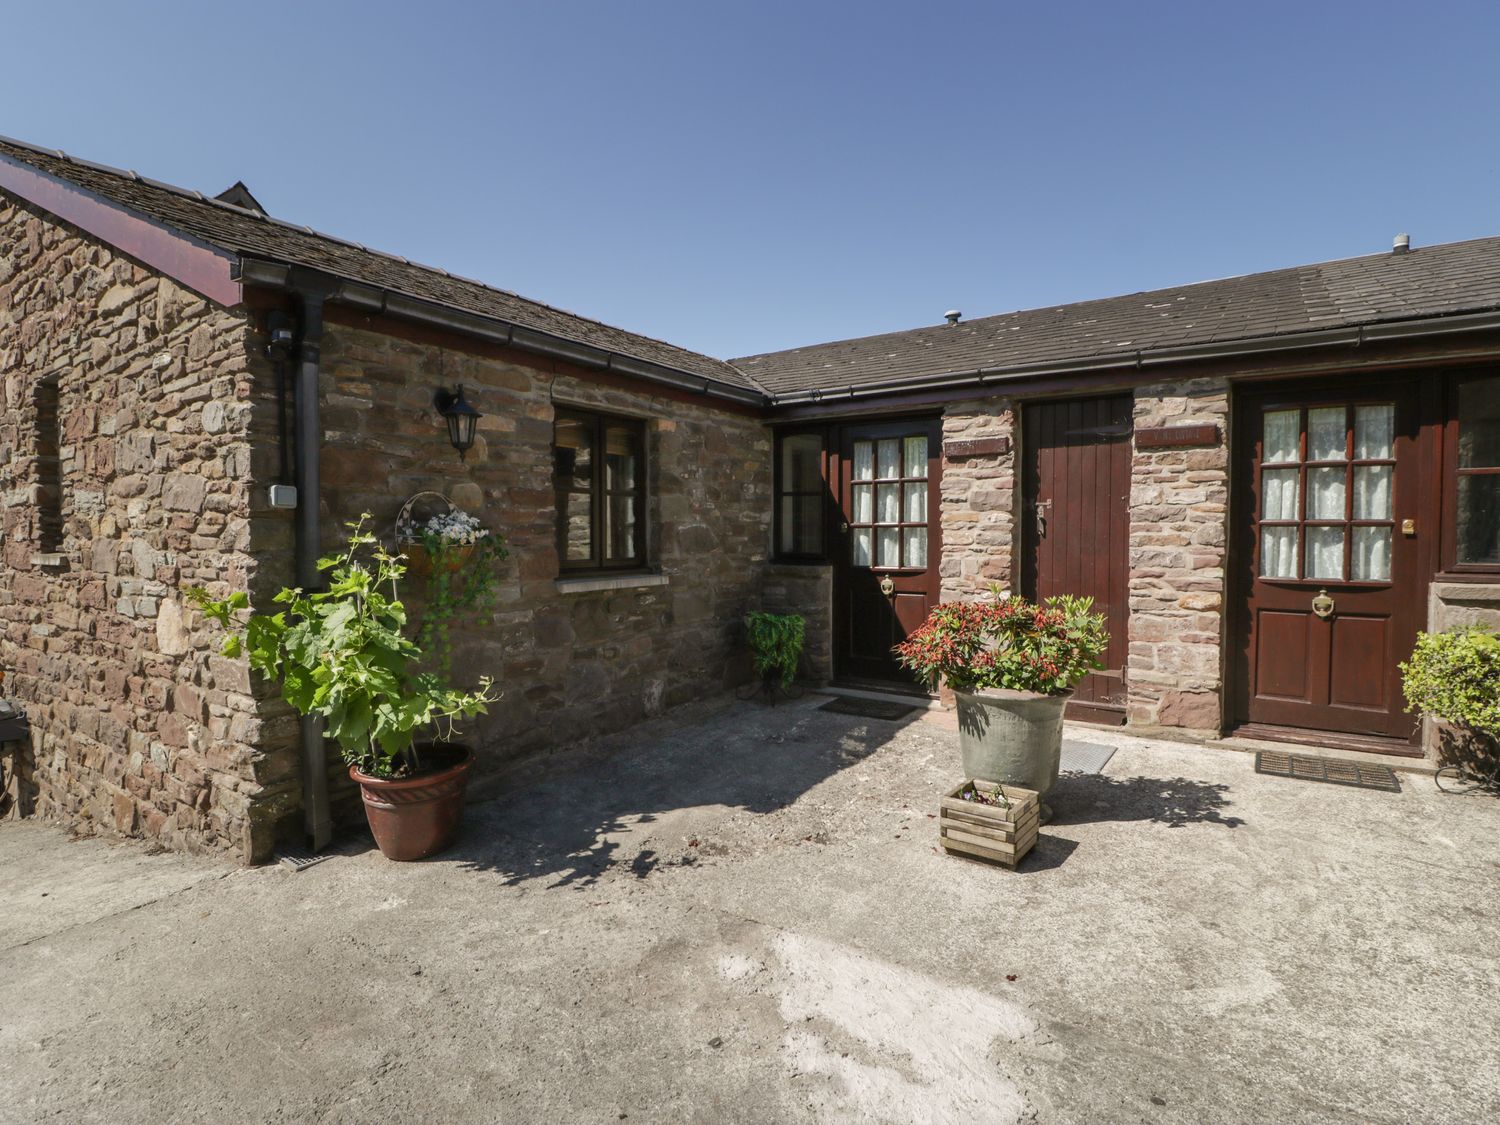 Brook Cottage - South Wales - 1129454 - photo 1